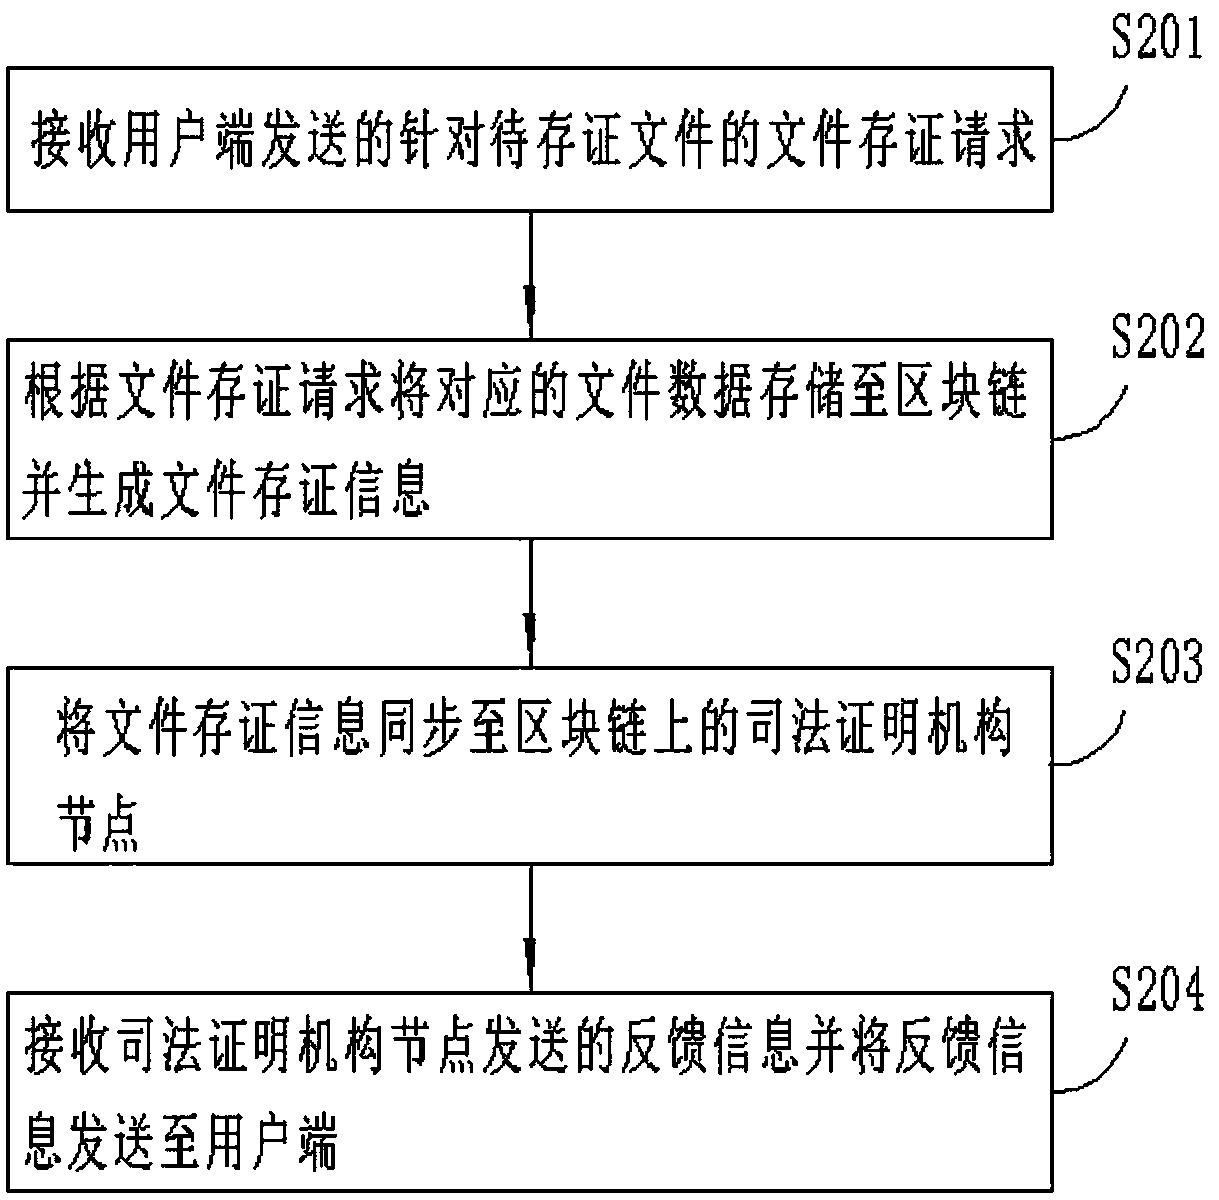 File attesting method and device, file verification method and device and file proof method and device